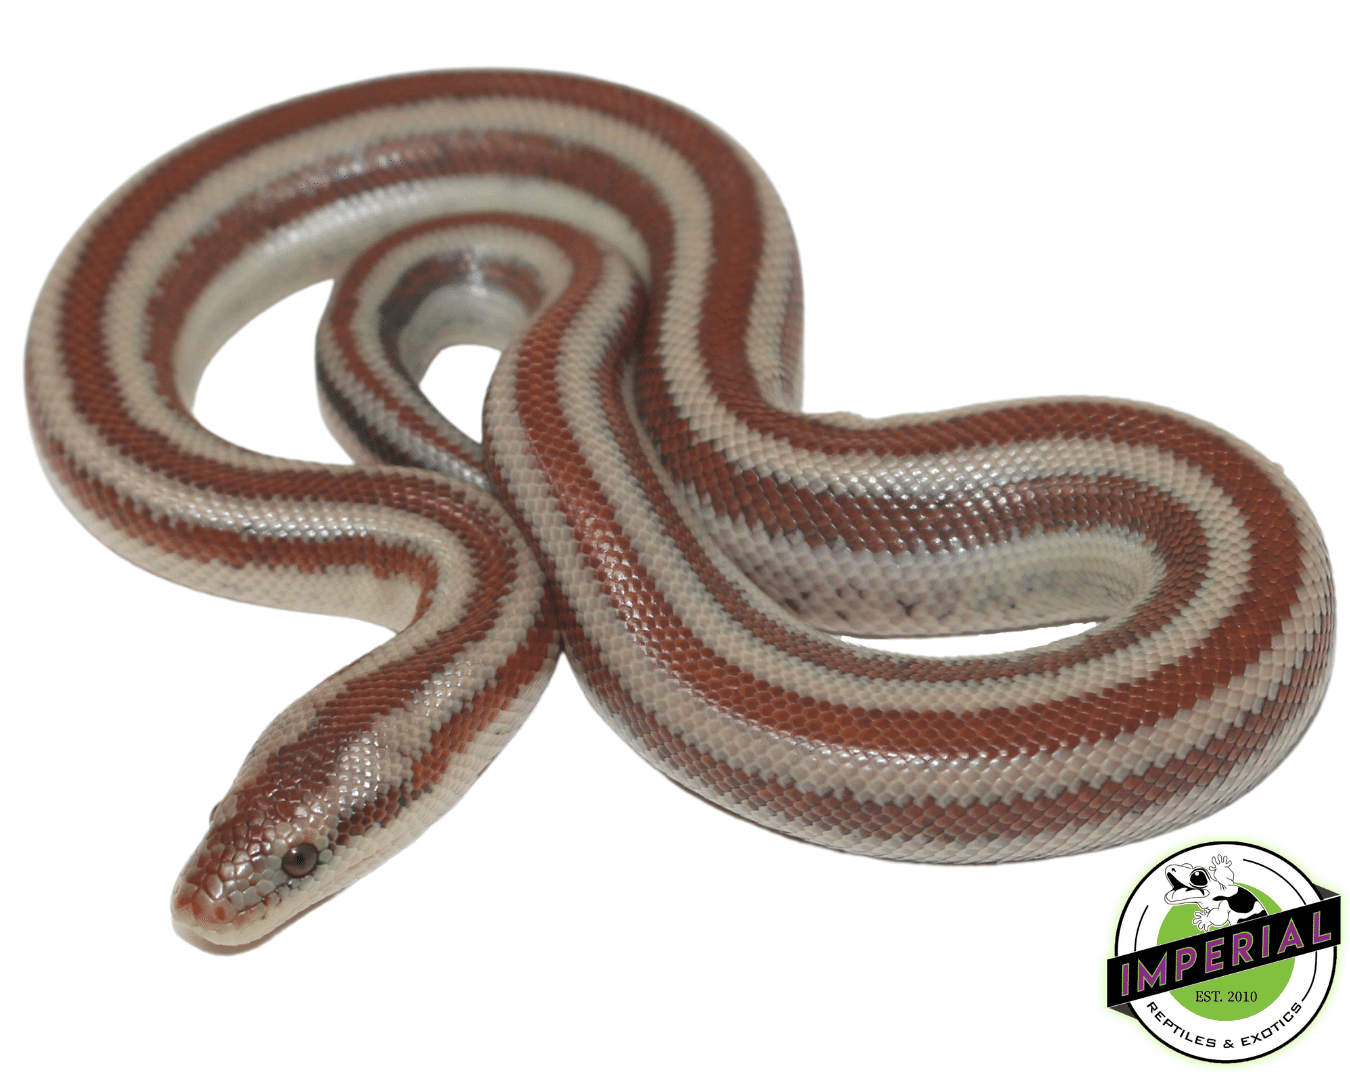 la rosy boa for sale, buy reptiles online at cheap prices